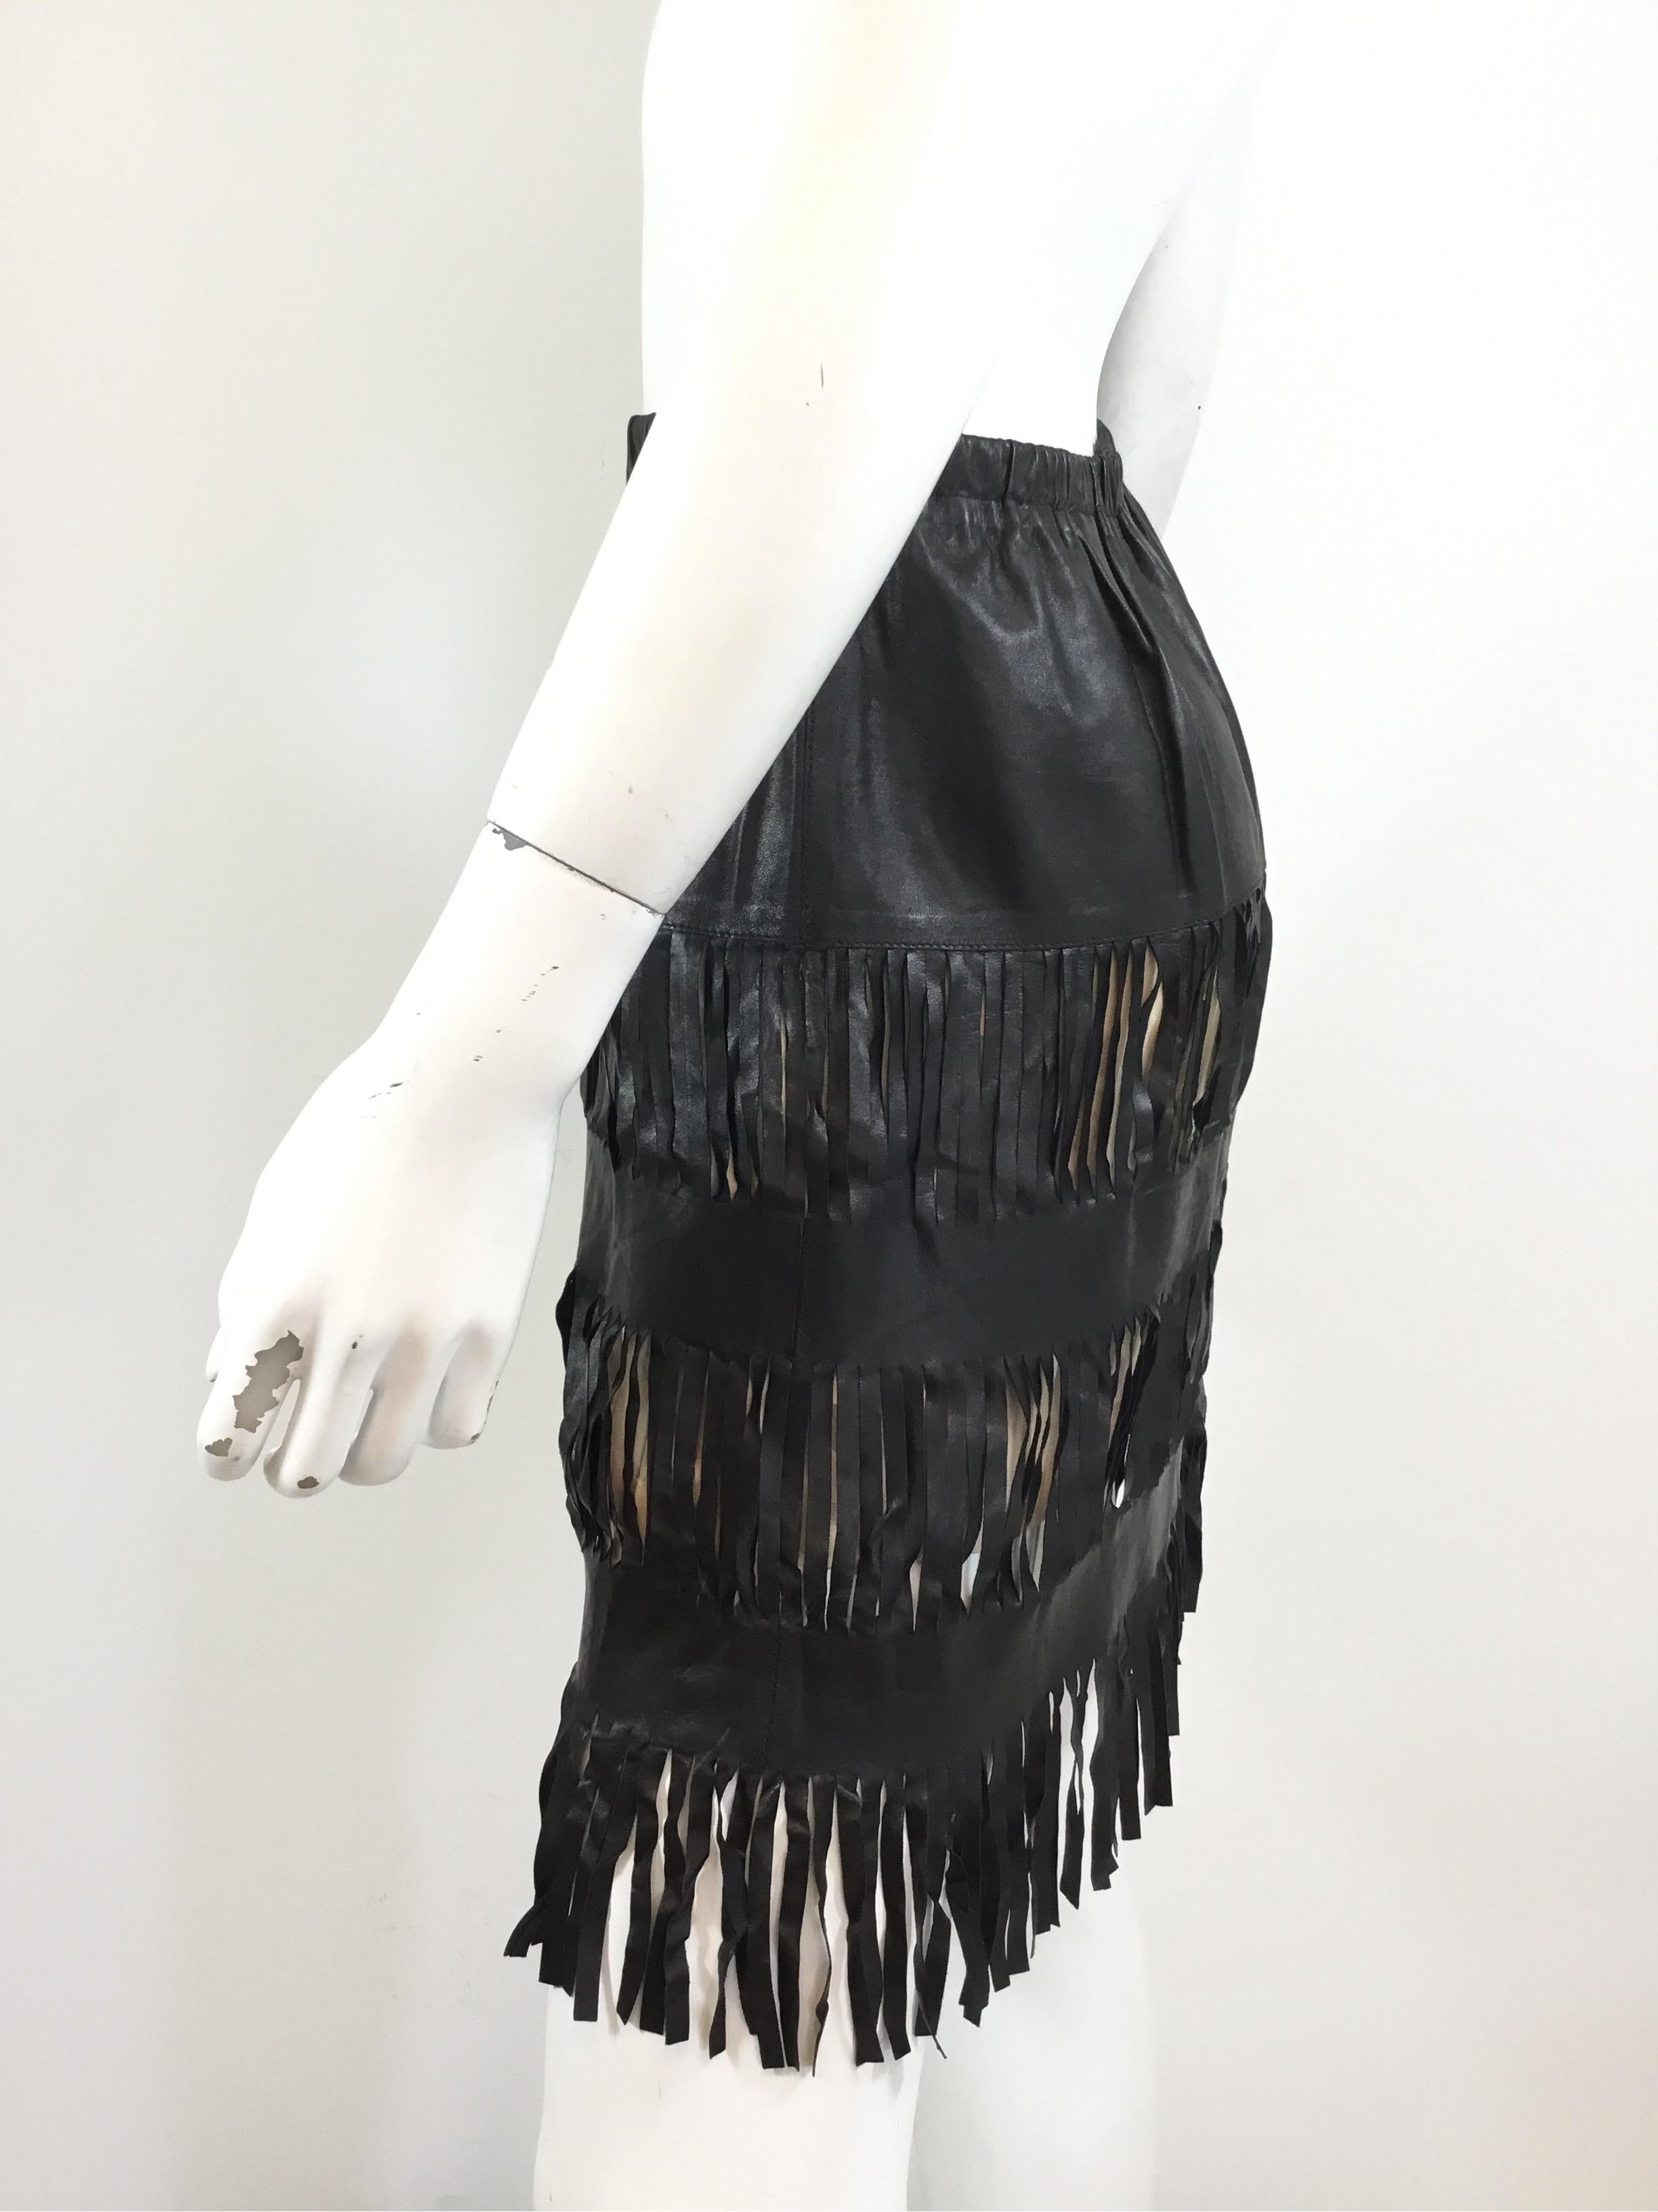 Black Tom Ford for Gucci Leather Fringe Skirt SS Runaway 1999